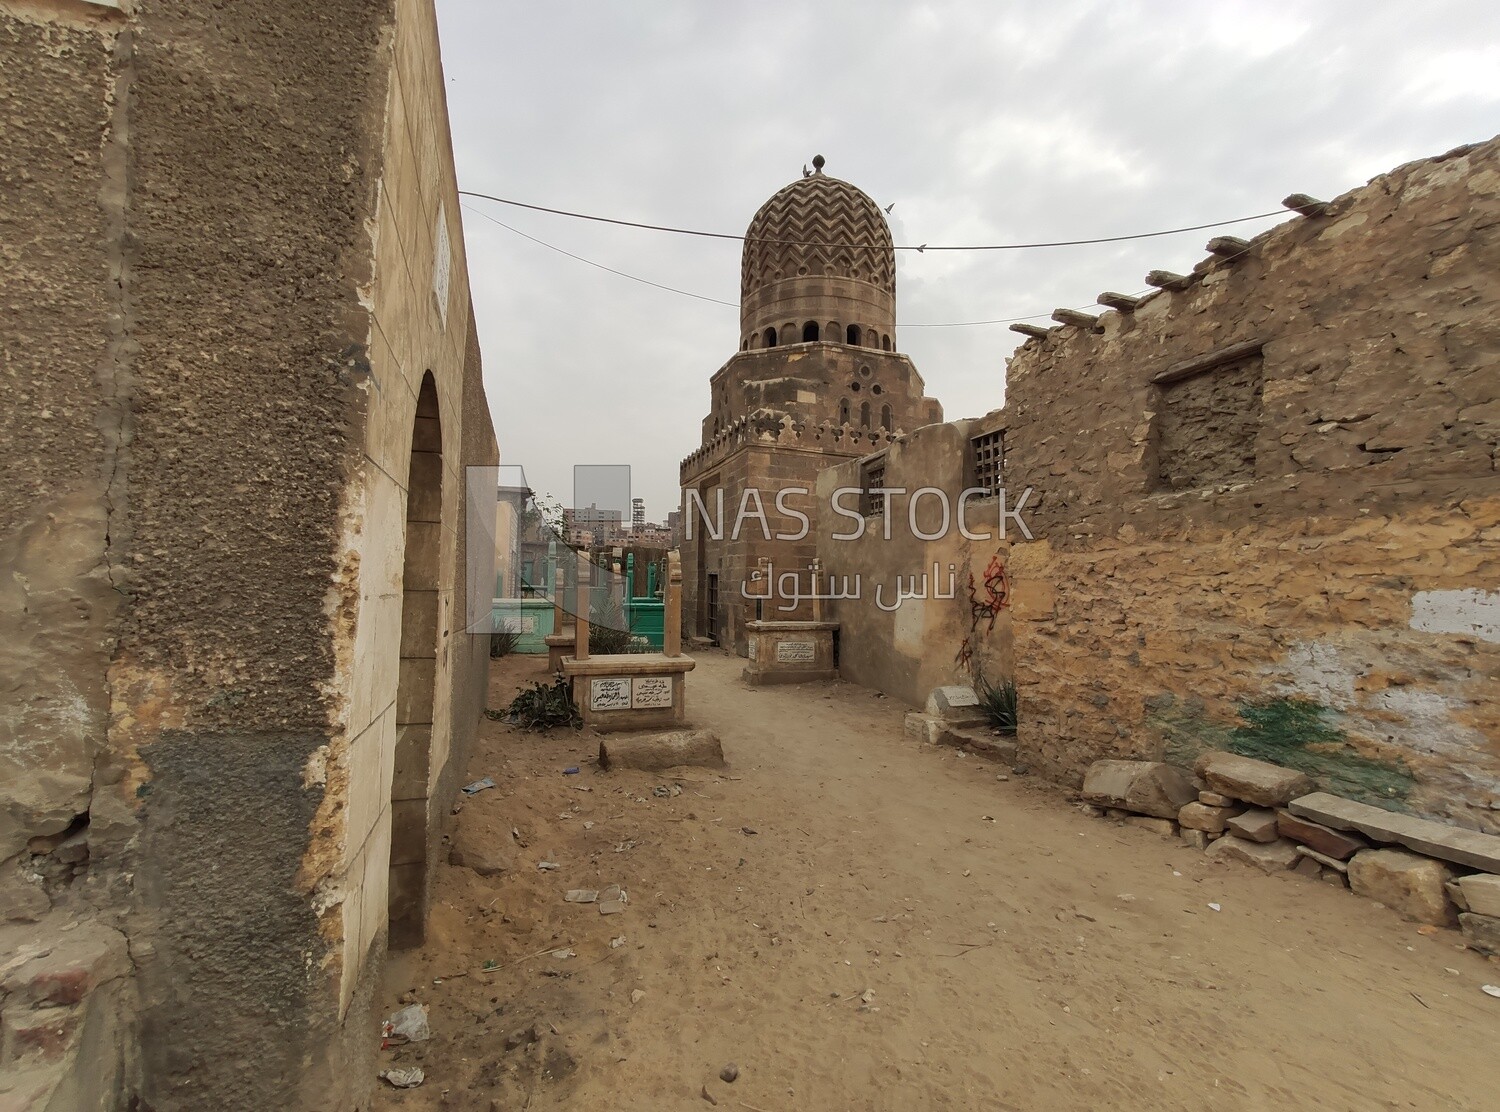 Some tombs in the City of the Dead, Egypt